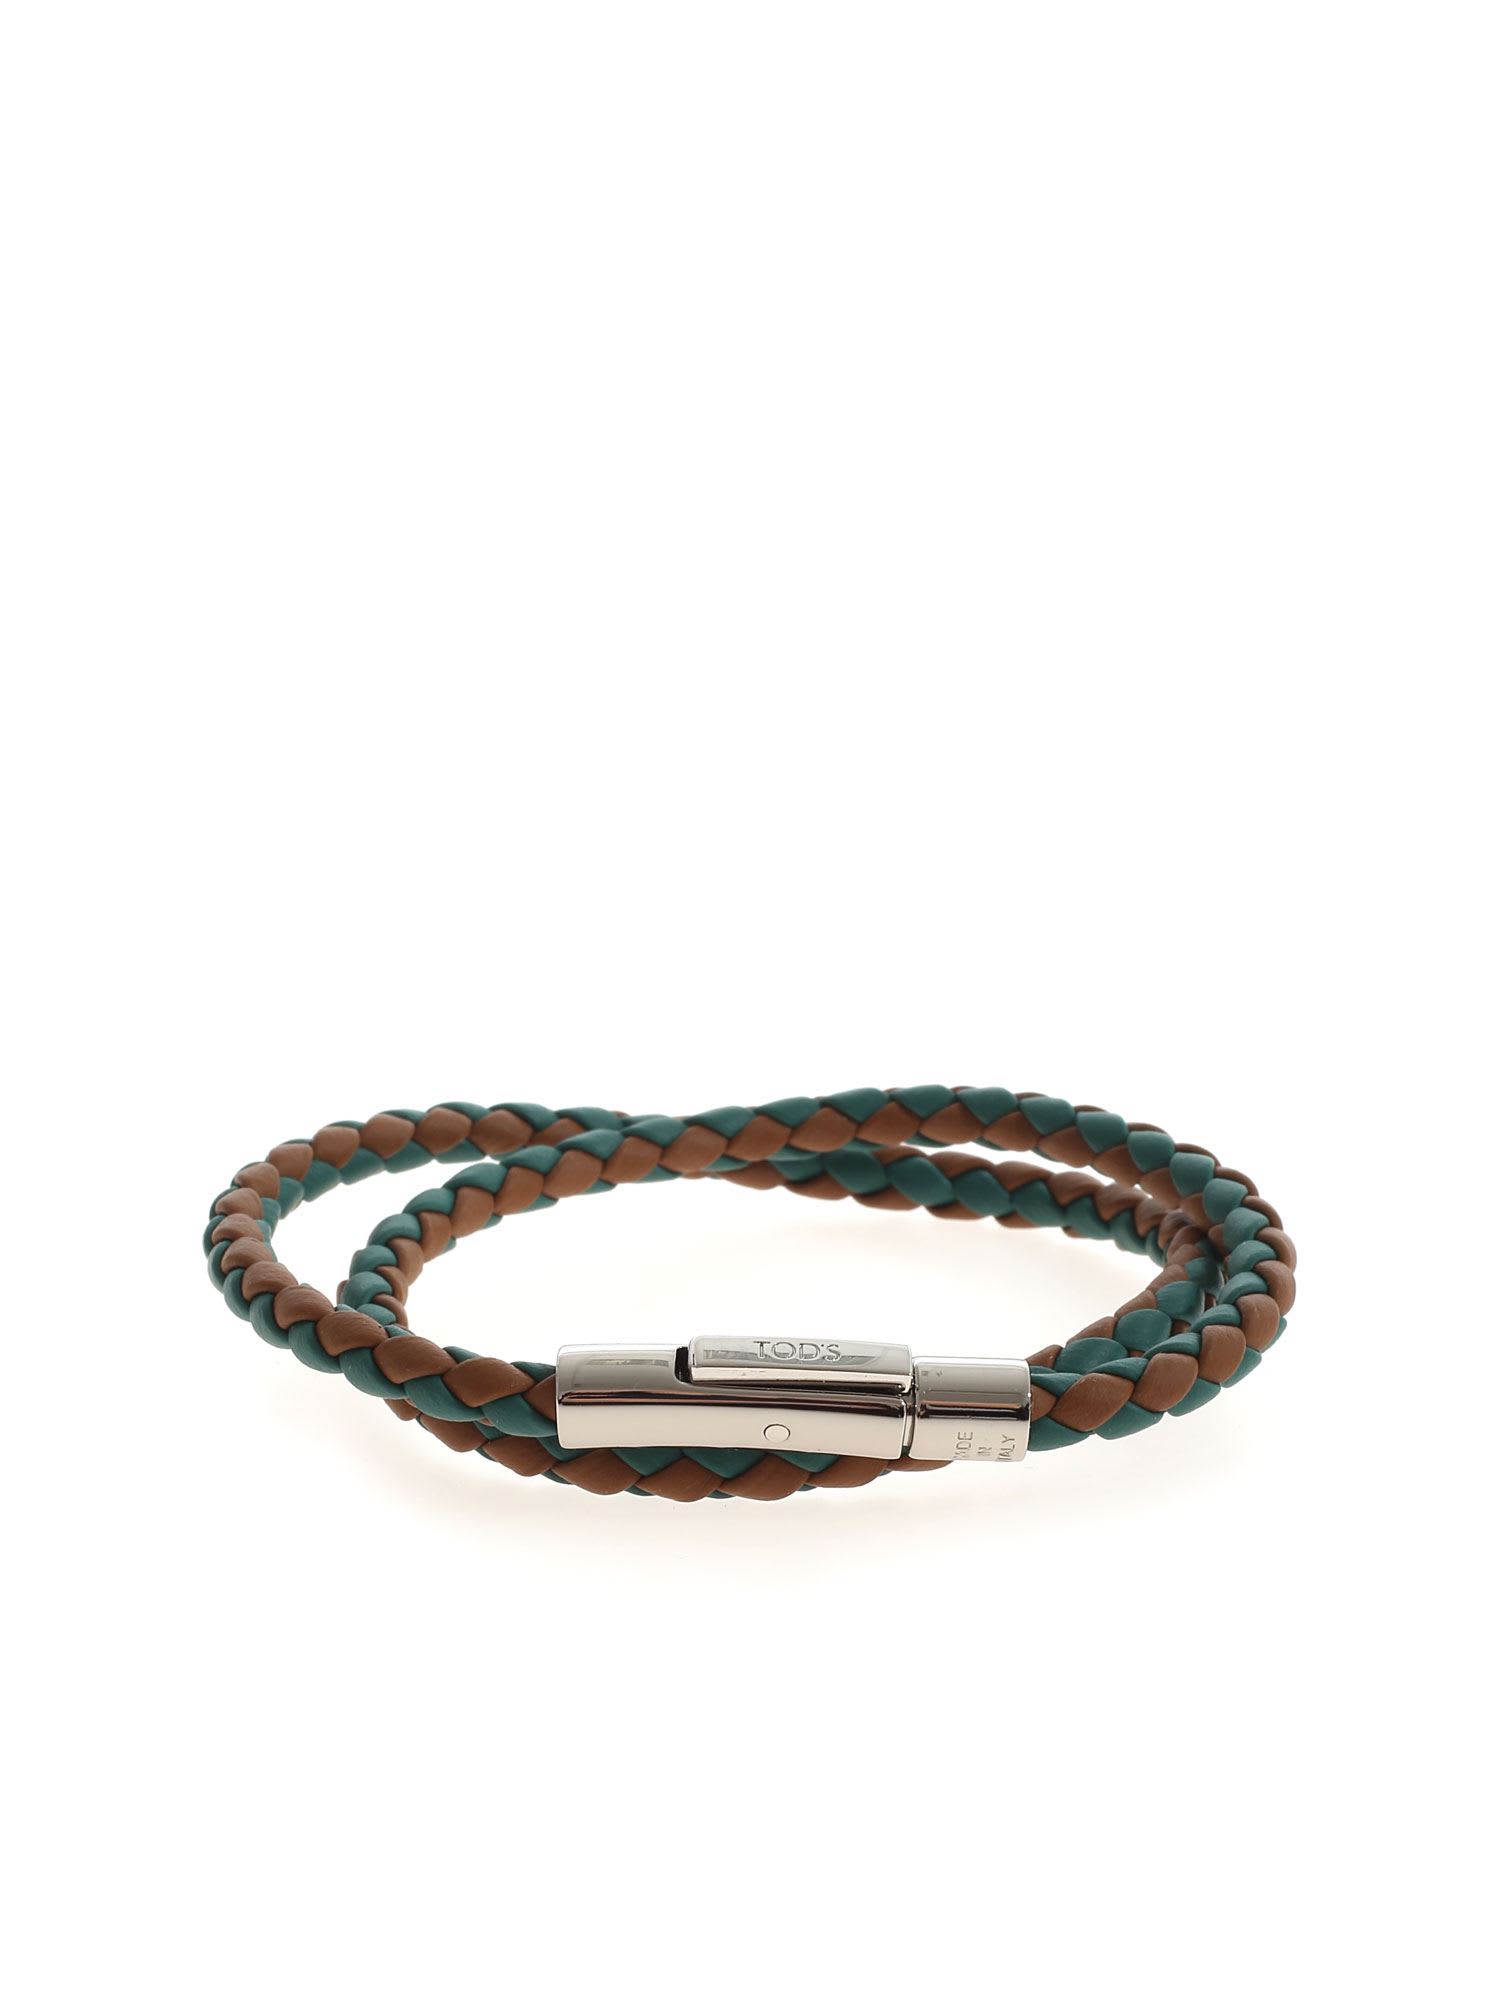 TOD'S MYCOLORS LEATHER BRACELET - GREEN AND BROWN,XEMB1900200FLR 7P04